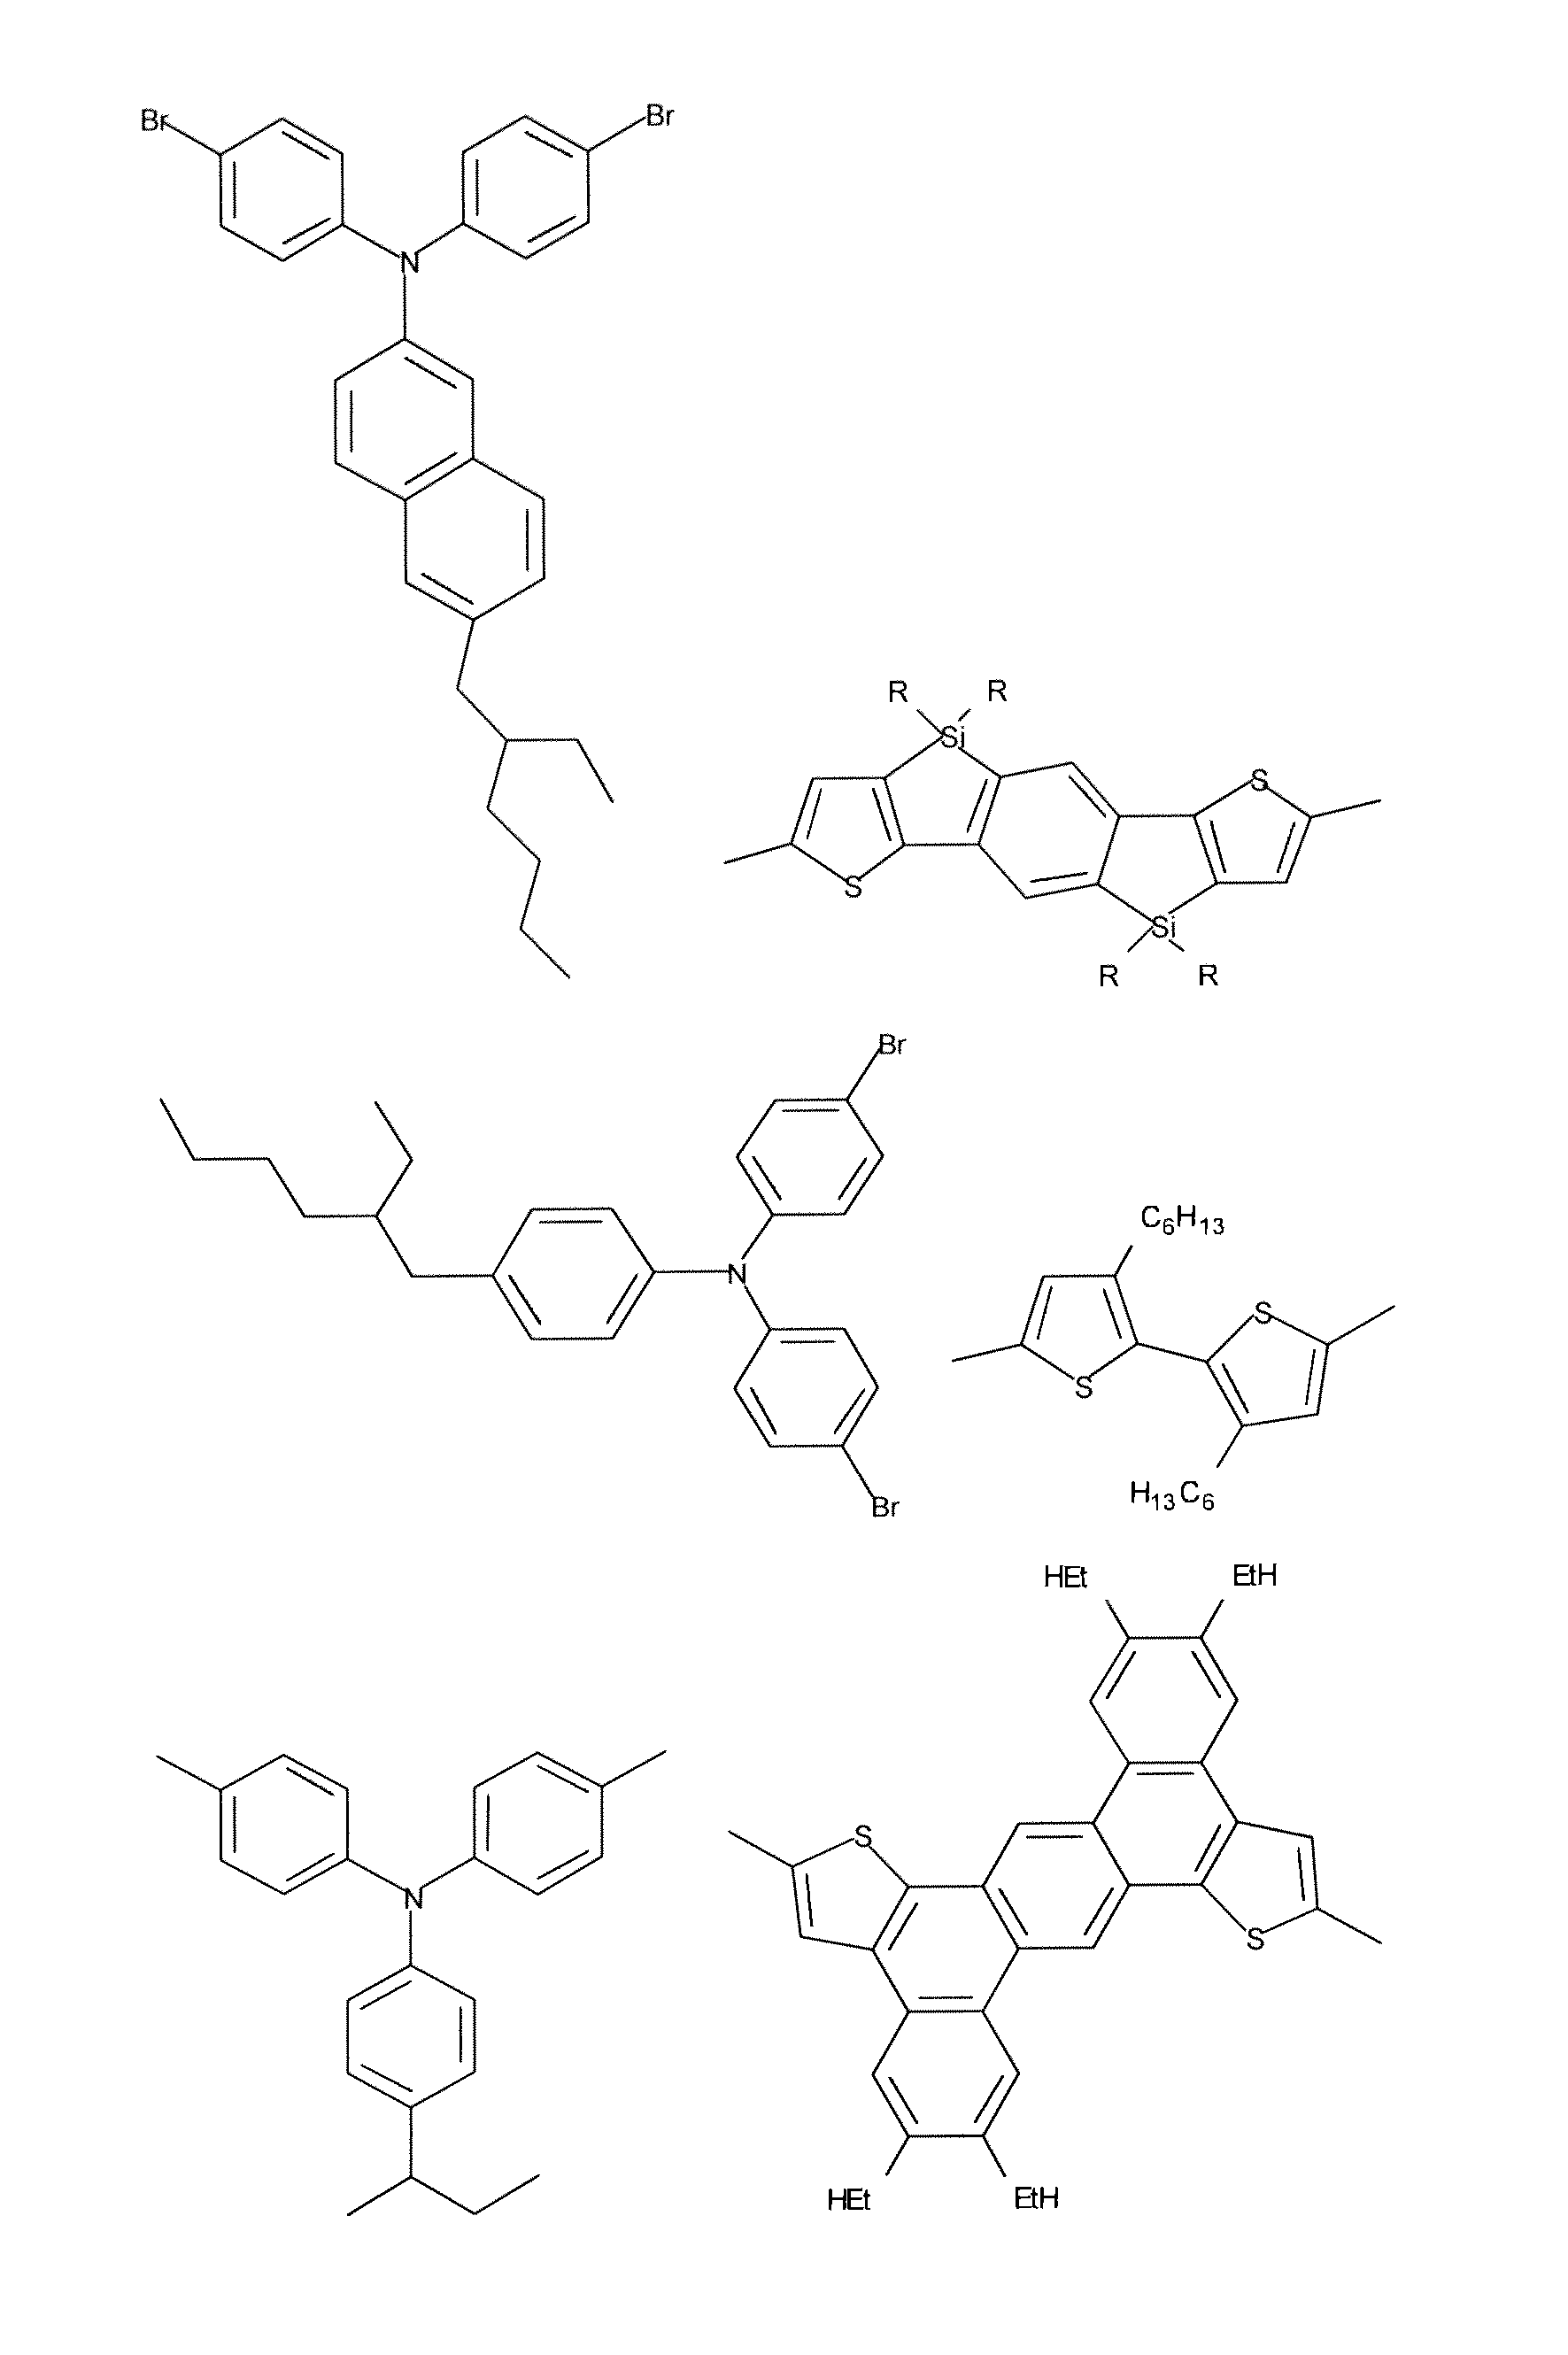 Organic electronic devices and polymers, including photovoltaic cells and diketone-based and diketopyrrolopyrrole-based polymers